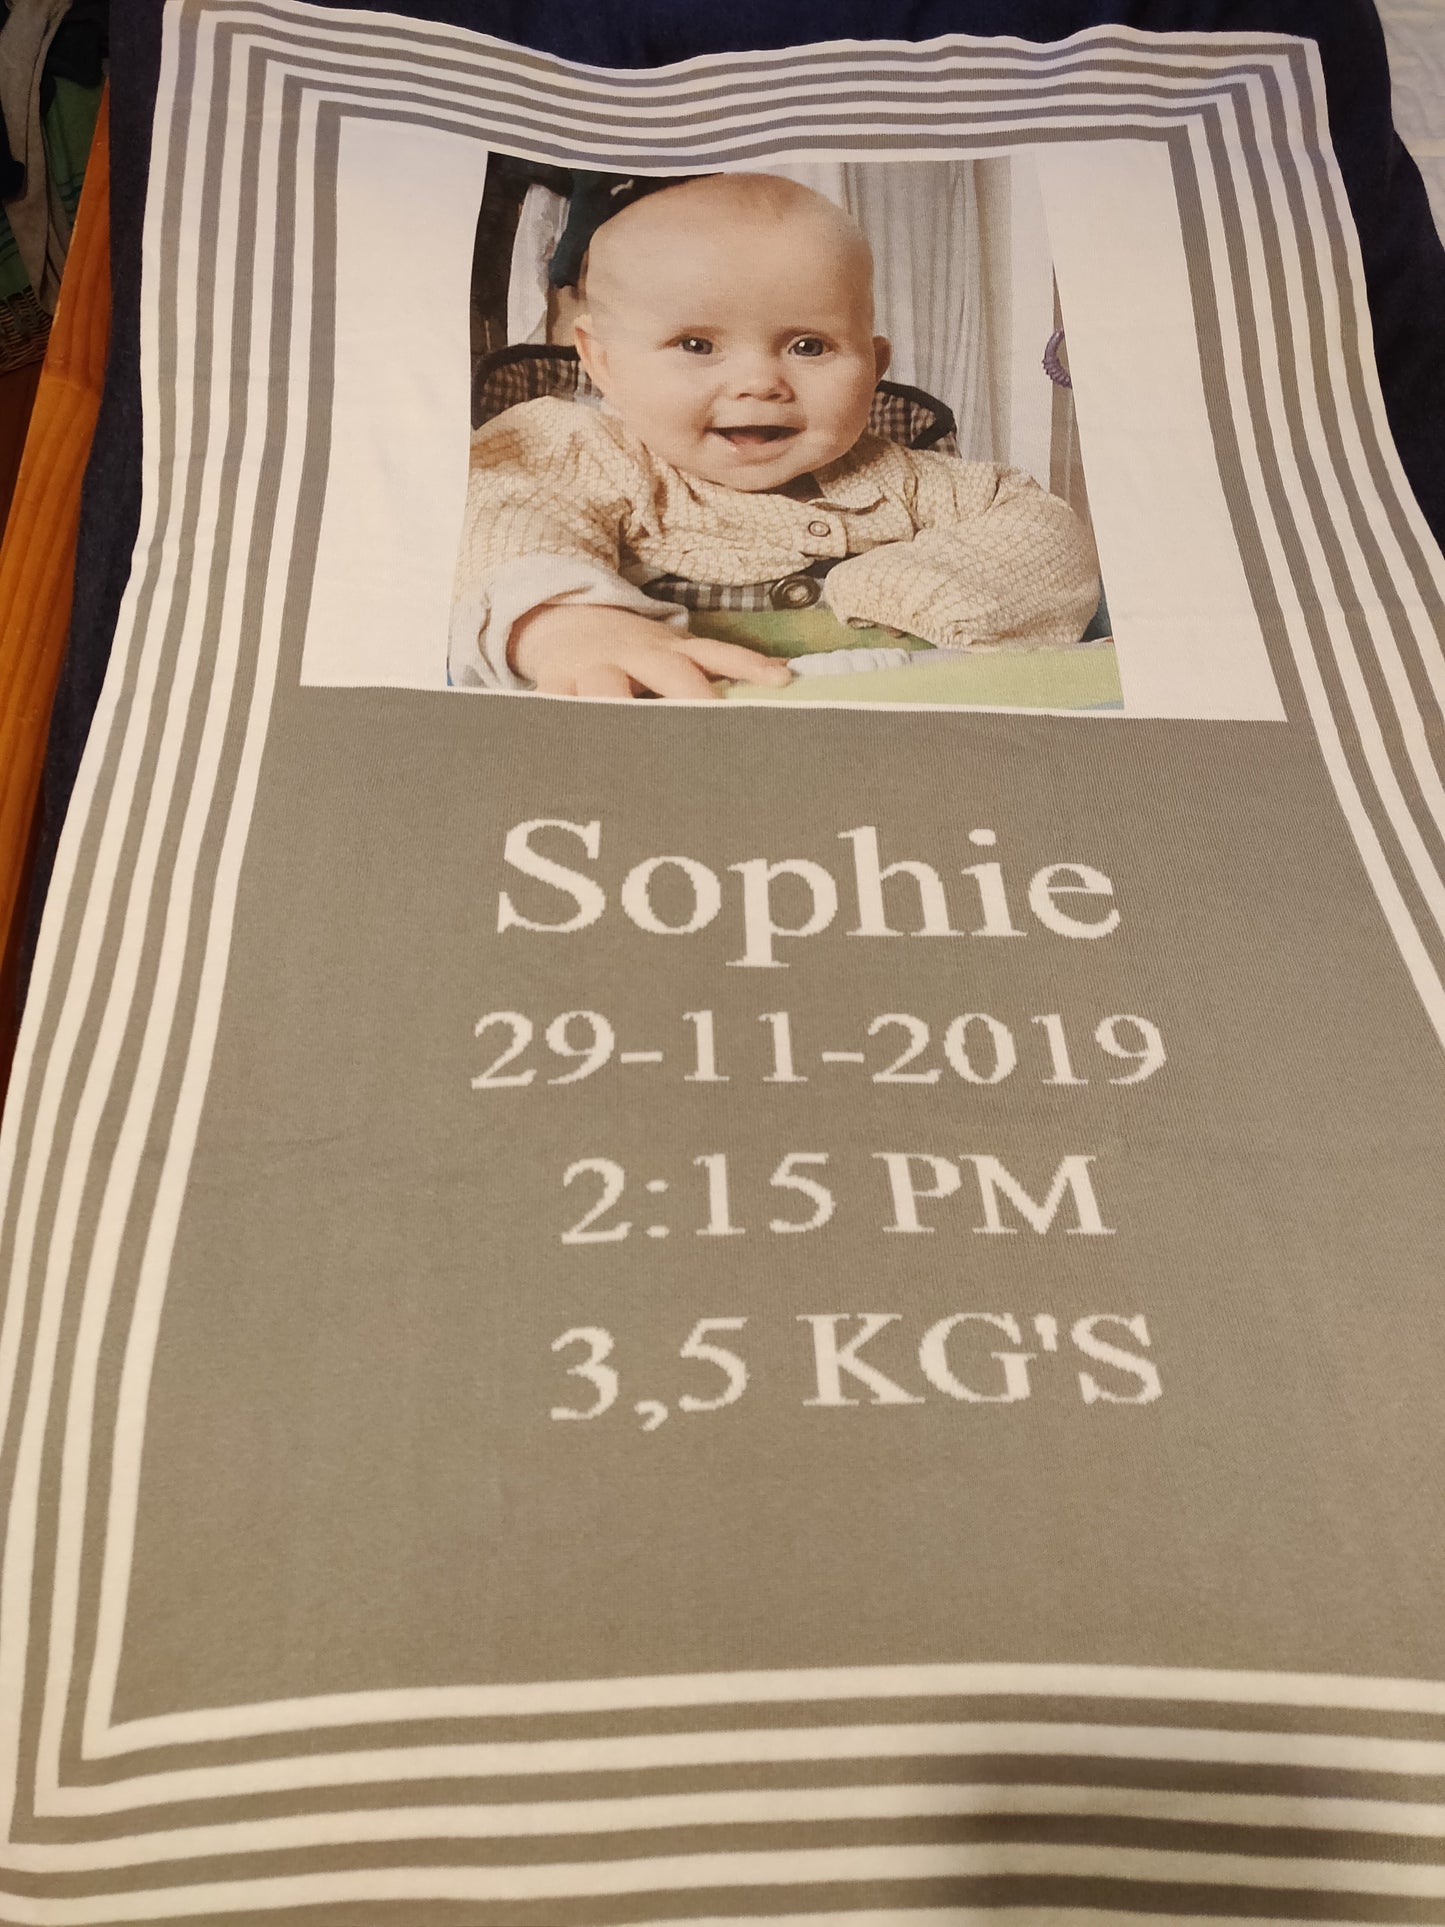 The Corrib Personalised Baby Blanket with Large Photo - Perfect Christening Gift